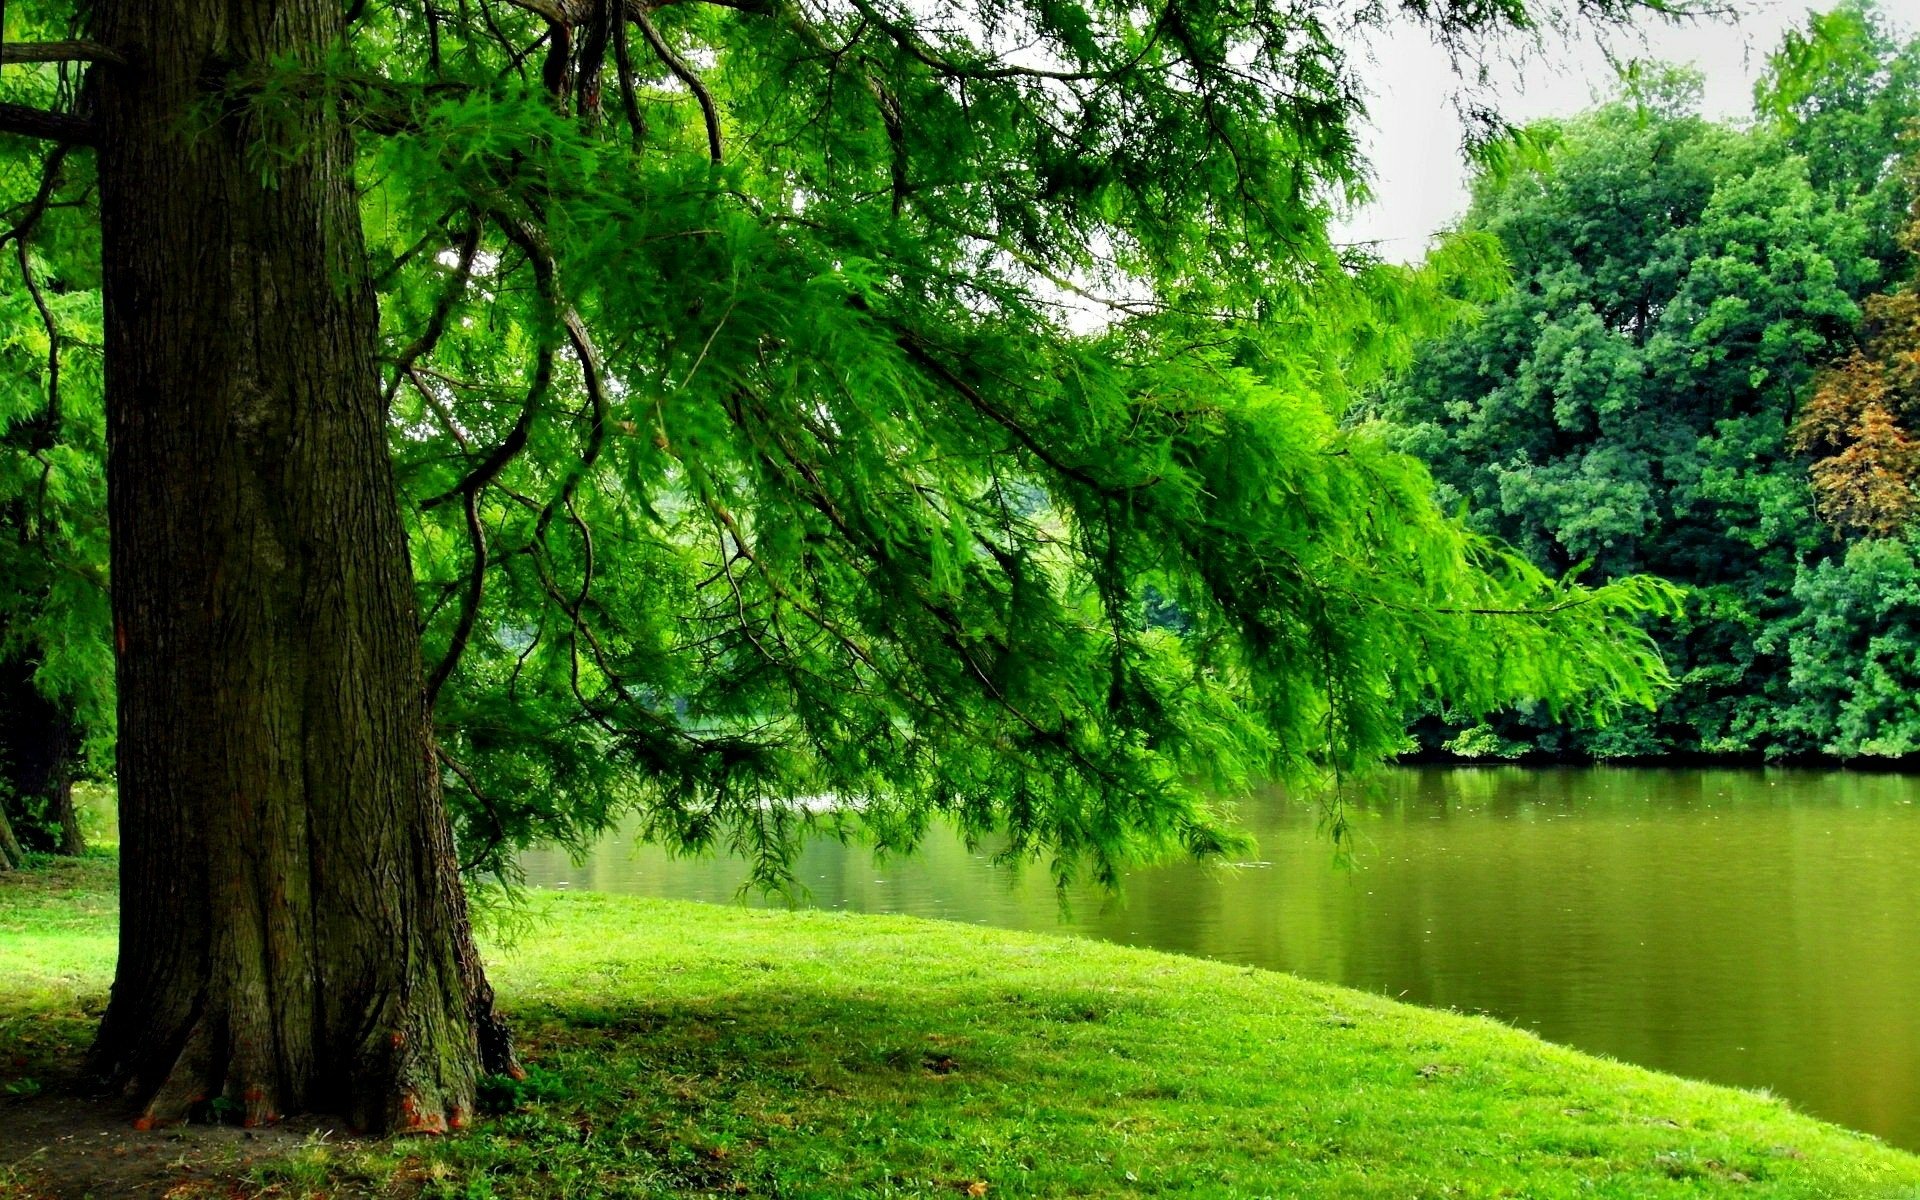  Green  Tree  over the River HD Wallpaper Background Image 